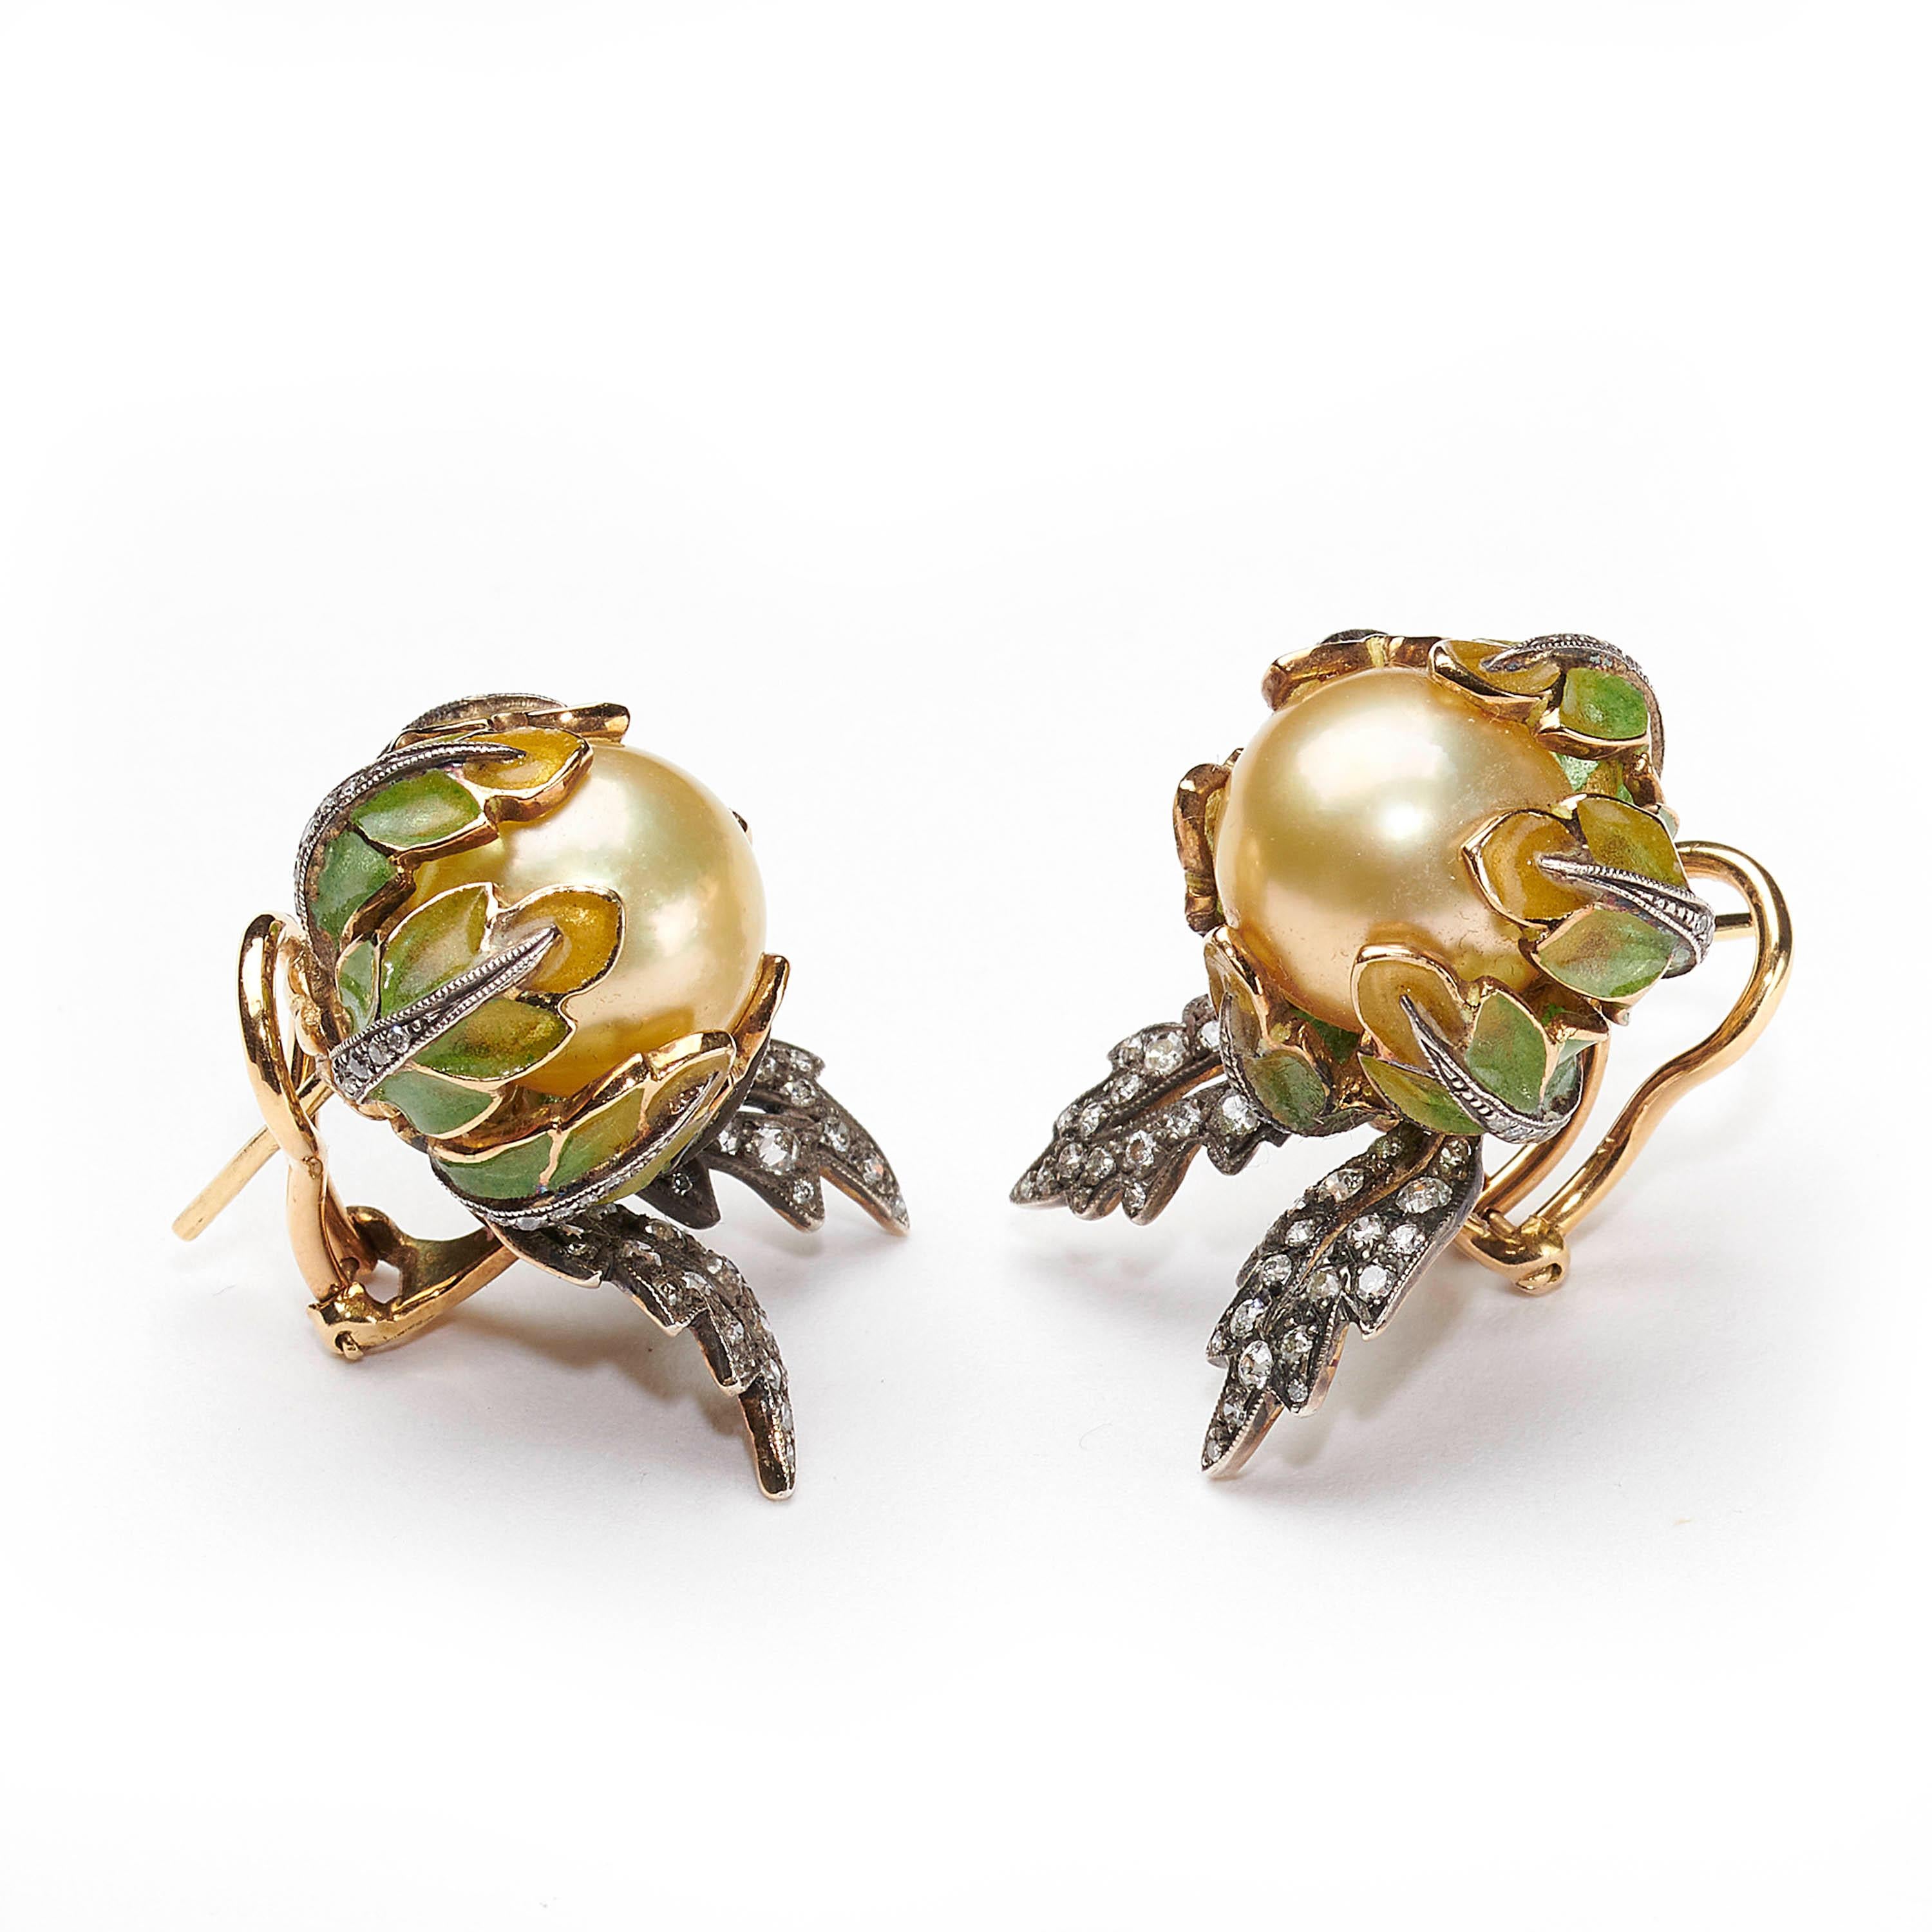 A pair of flower earrings, with yellow South Sea pearl centres, yellow to green plique à jour enamel petals and eight-cut and old-cut diamond set leaves, mounted in silver and 14 carat gold.